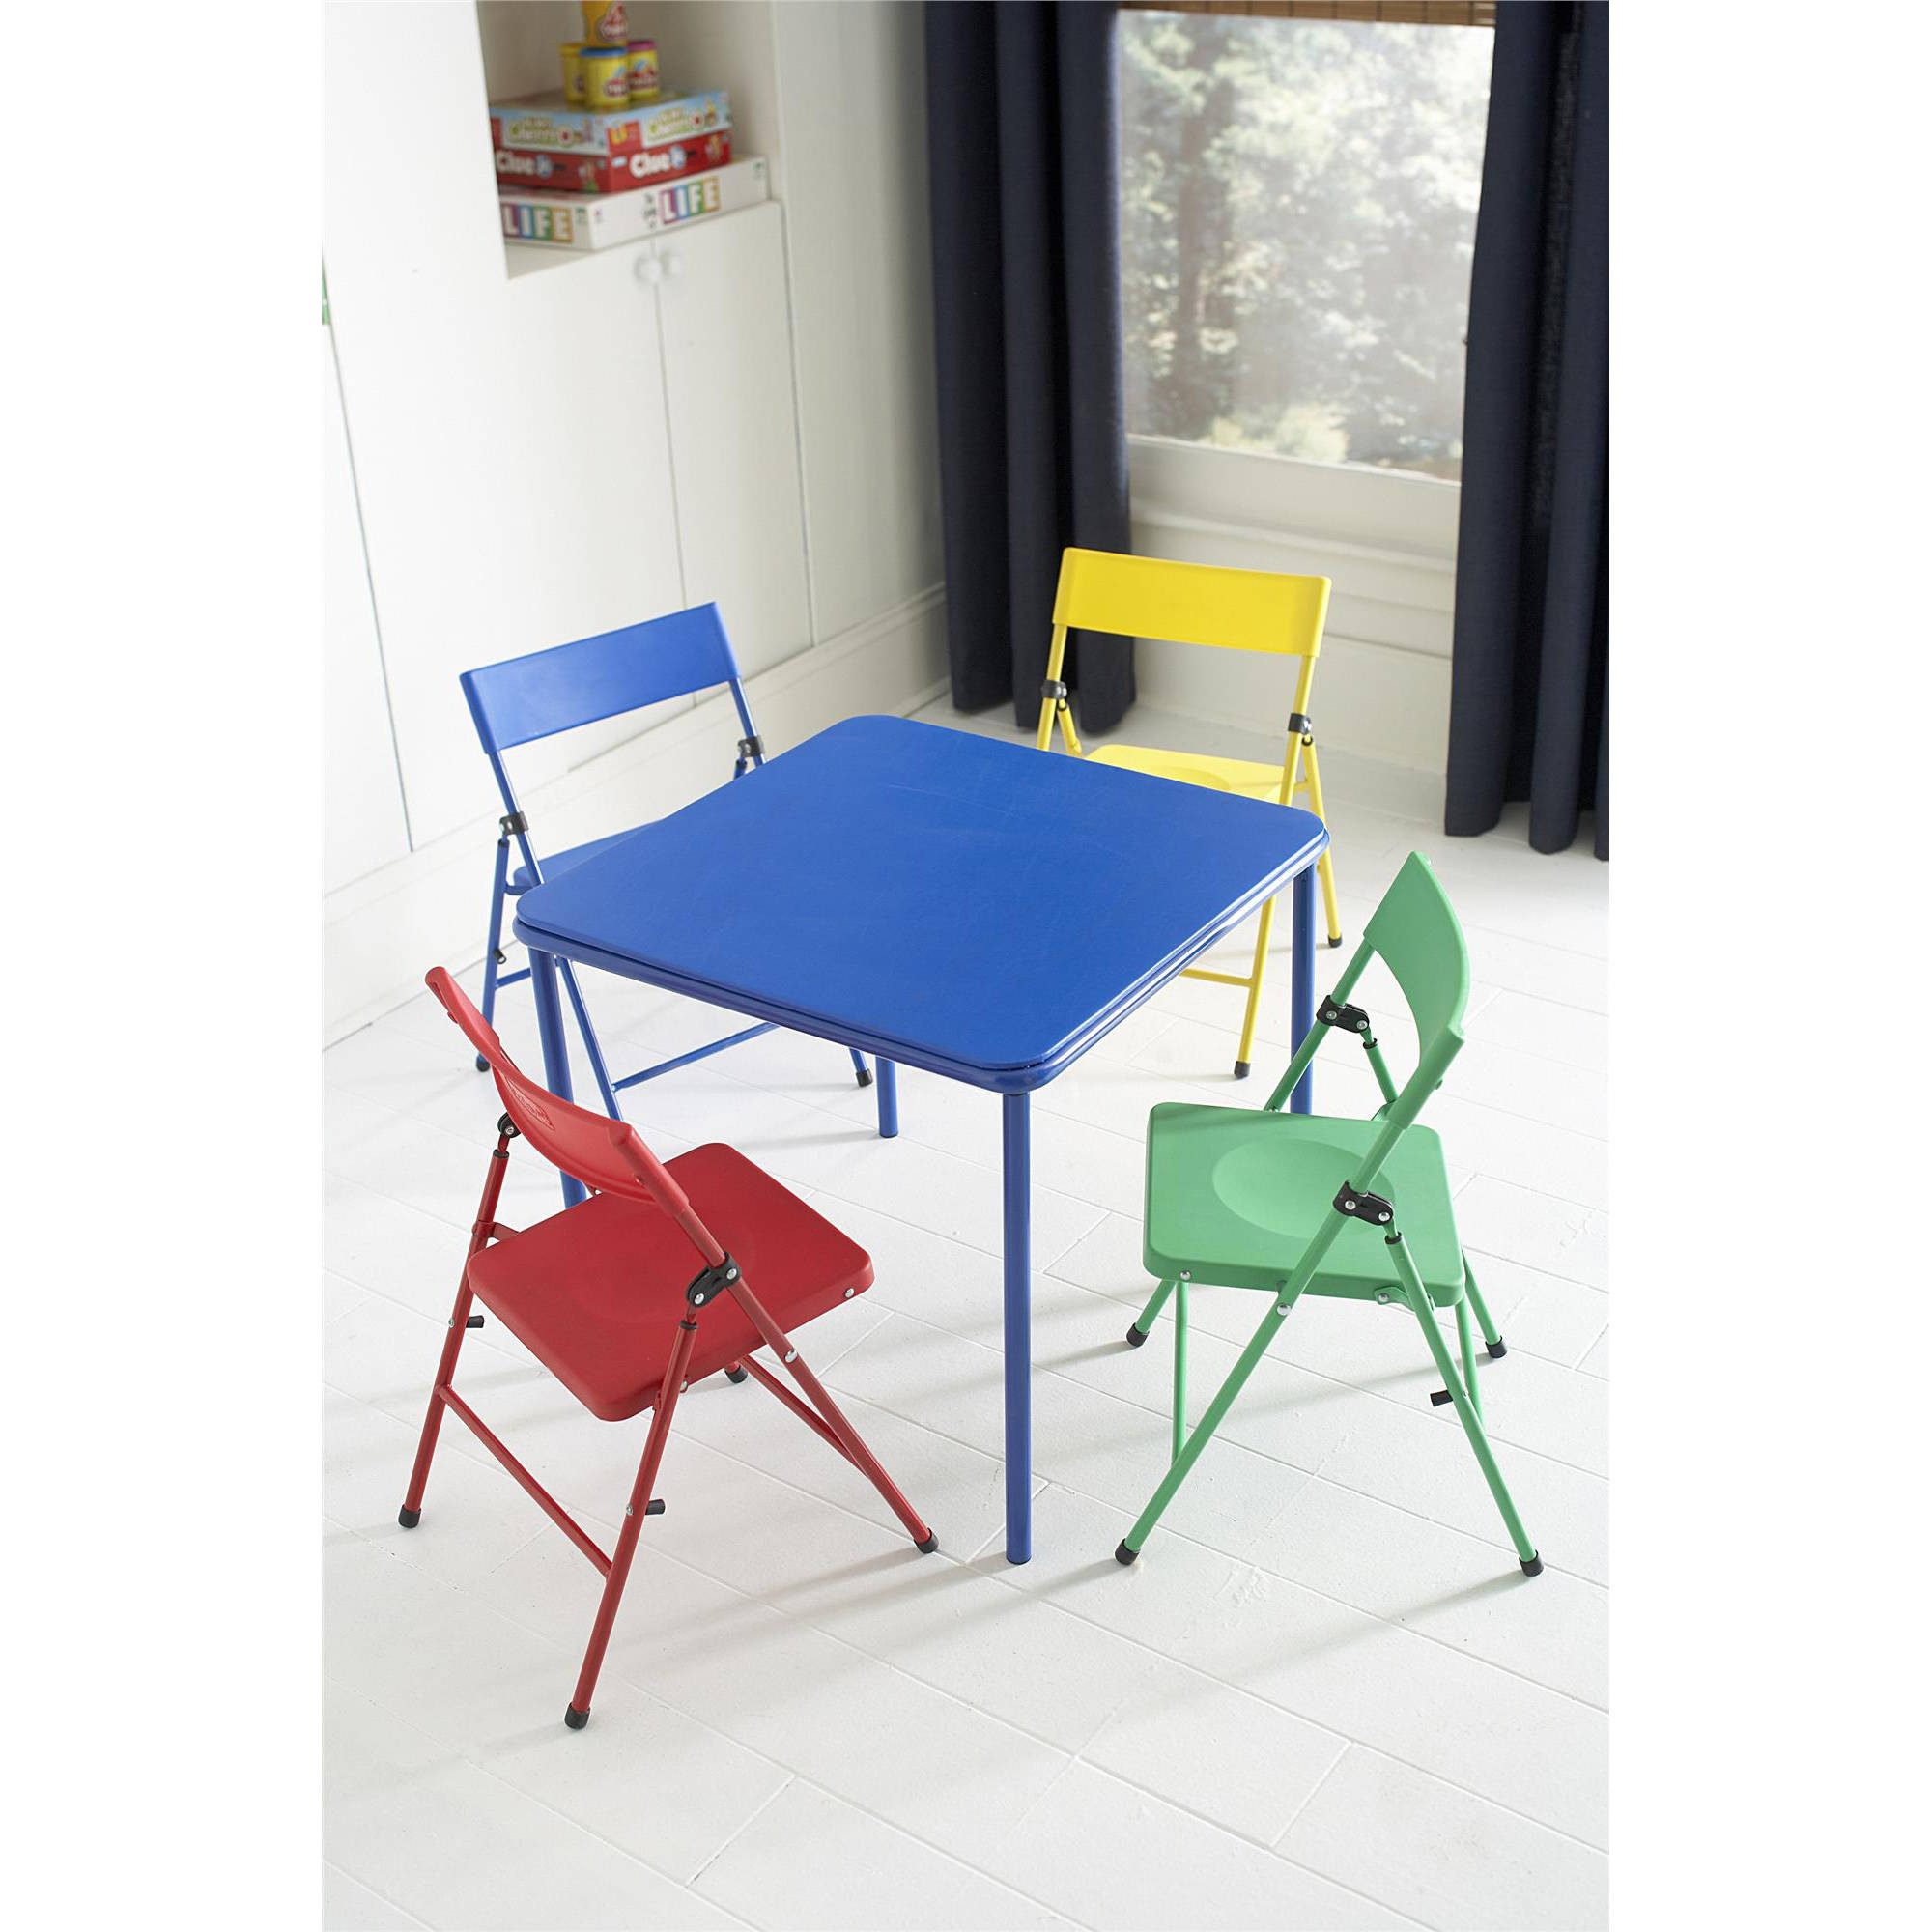 Walmart Kids Table Set
 Foldable chair with table set of solid kumfort folding